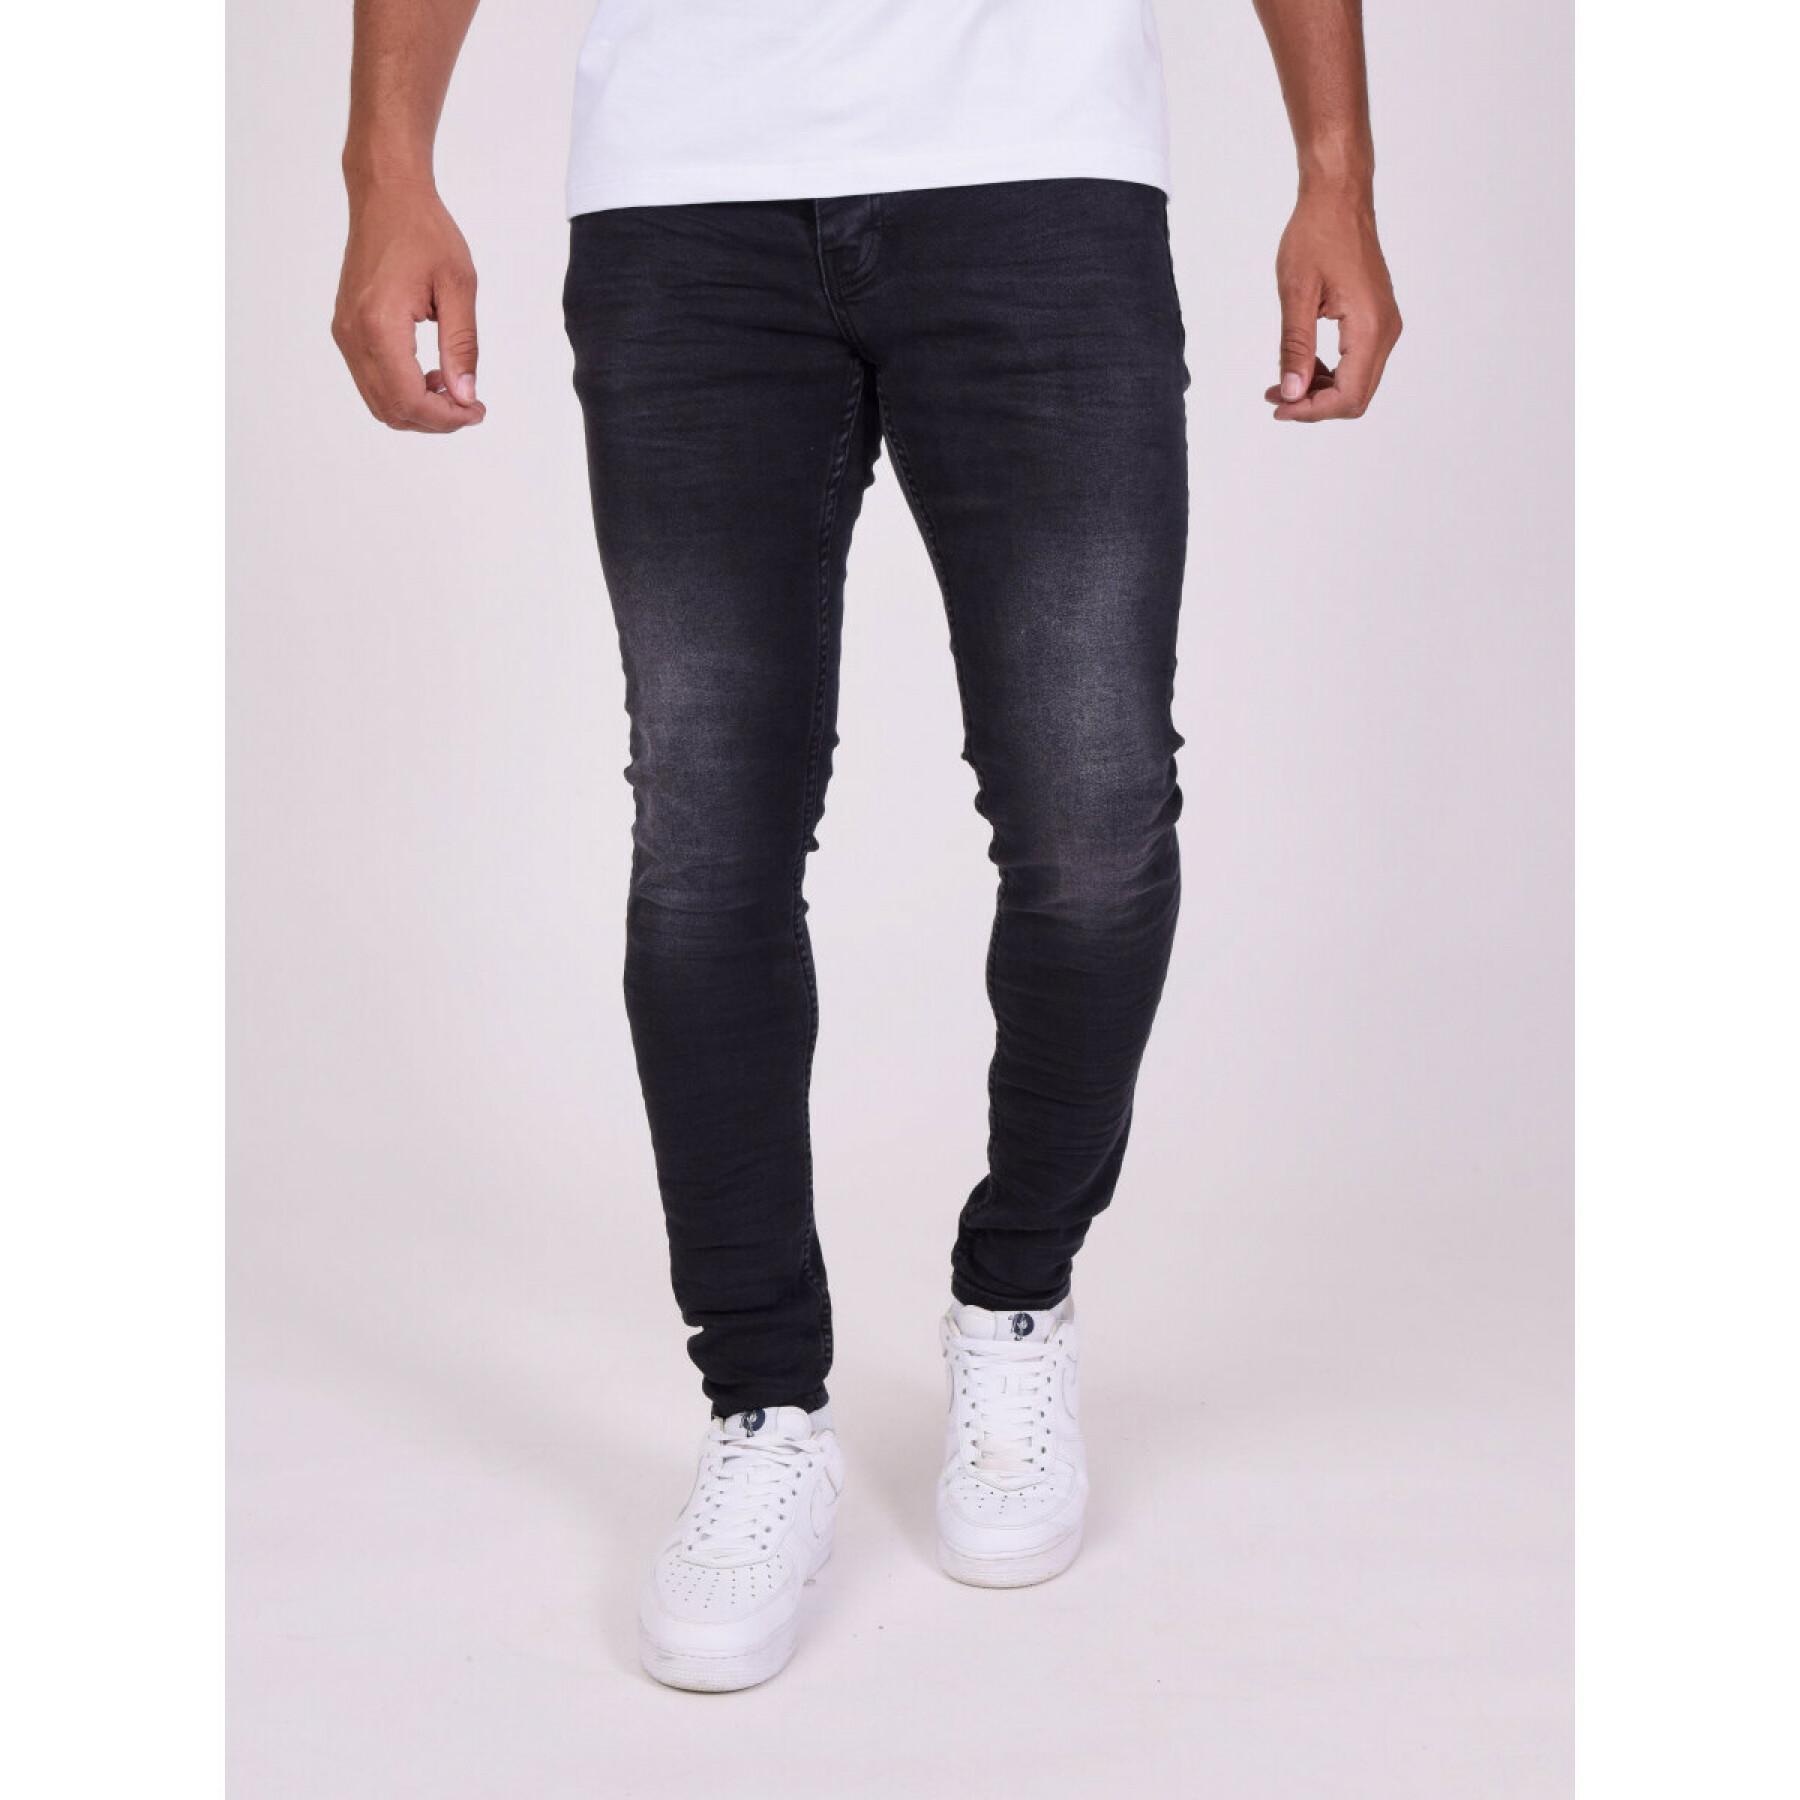 Skinny jeans with logo detail on the back Project X Paris